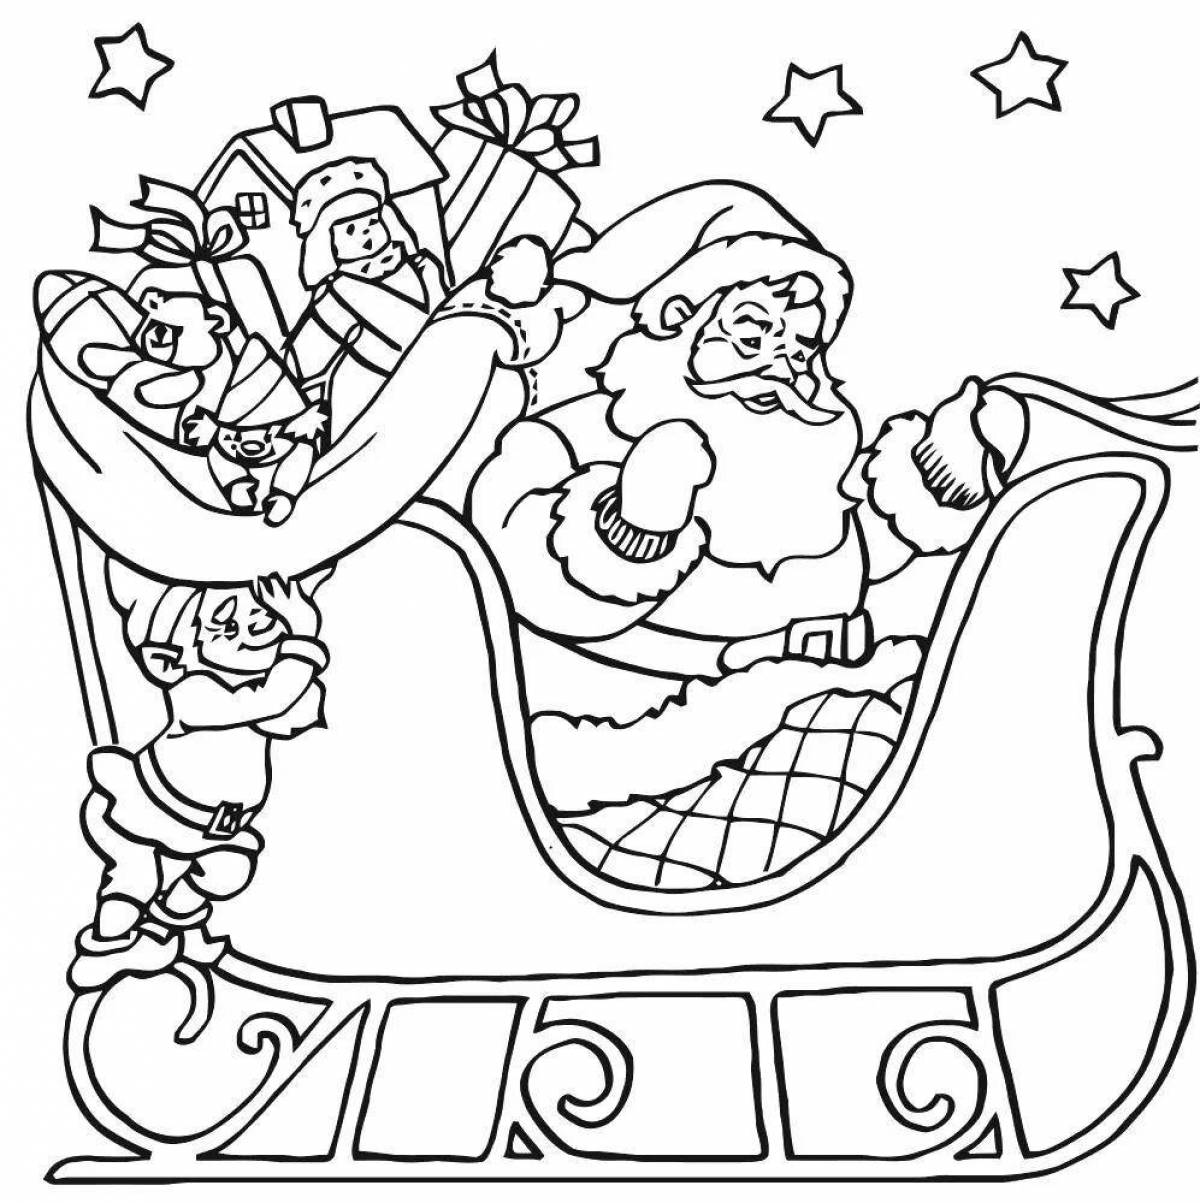 Coloring page happy santa claus on sleigh